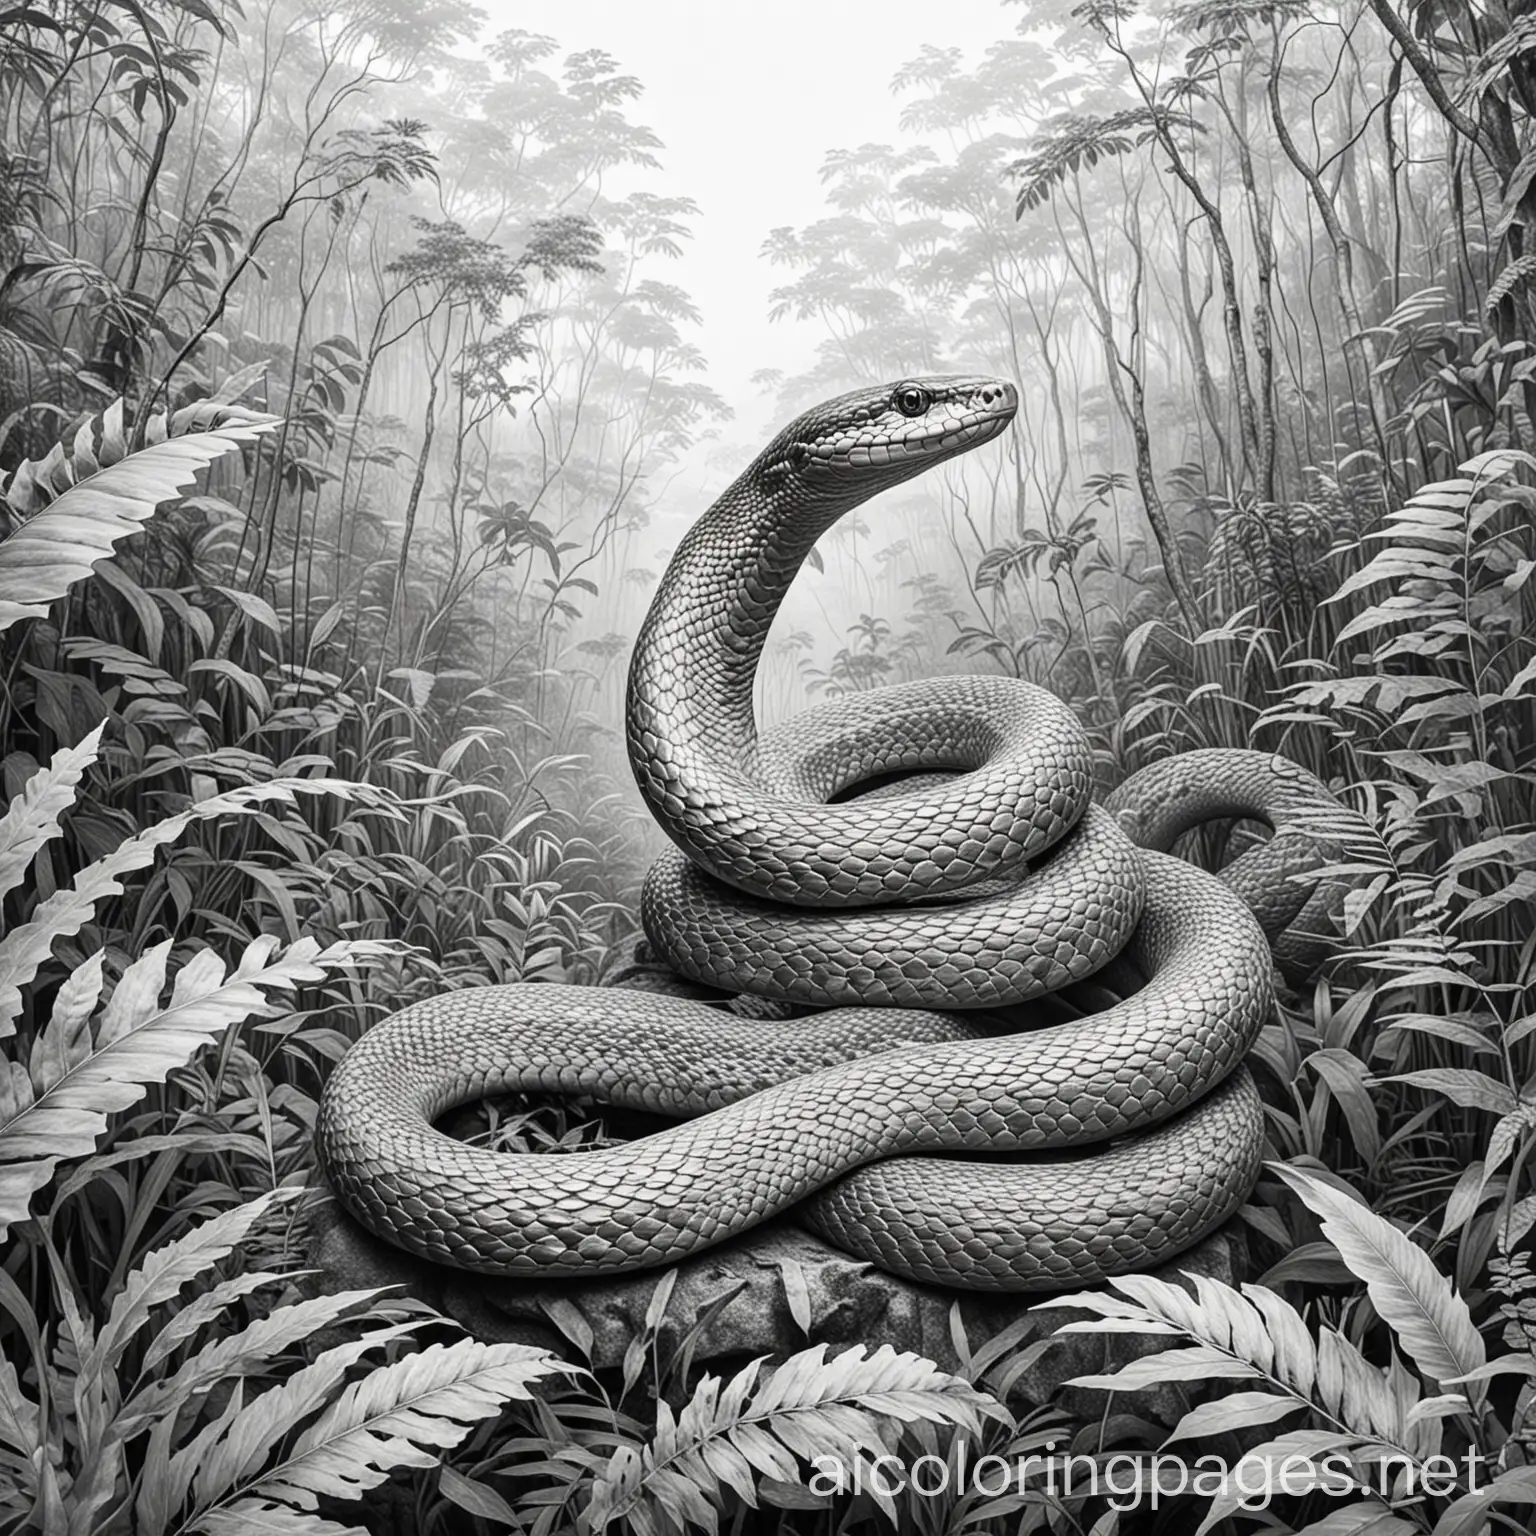 snake in the amazon forest, Coloring Page, black and white, line art, white background, Simplicity, Ample White Space. The background of the coloring page is plain white to make it easy for young children to color within the lines. The outlines of all the subjects are easy to distinguish, making it simple for kids to color without too much difficulty